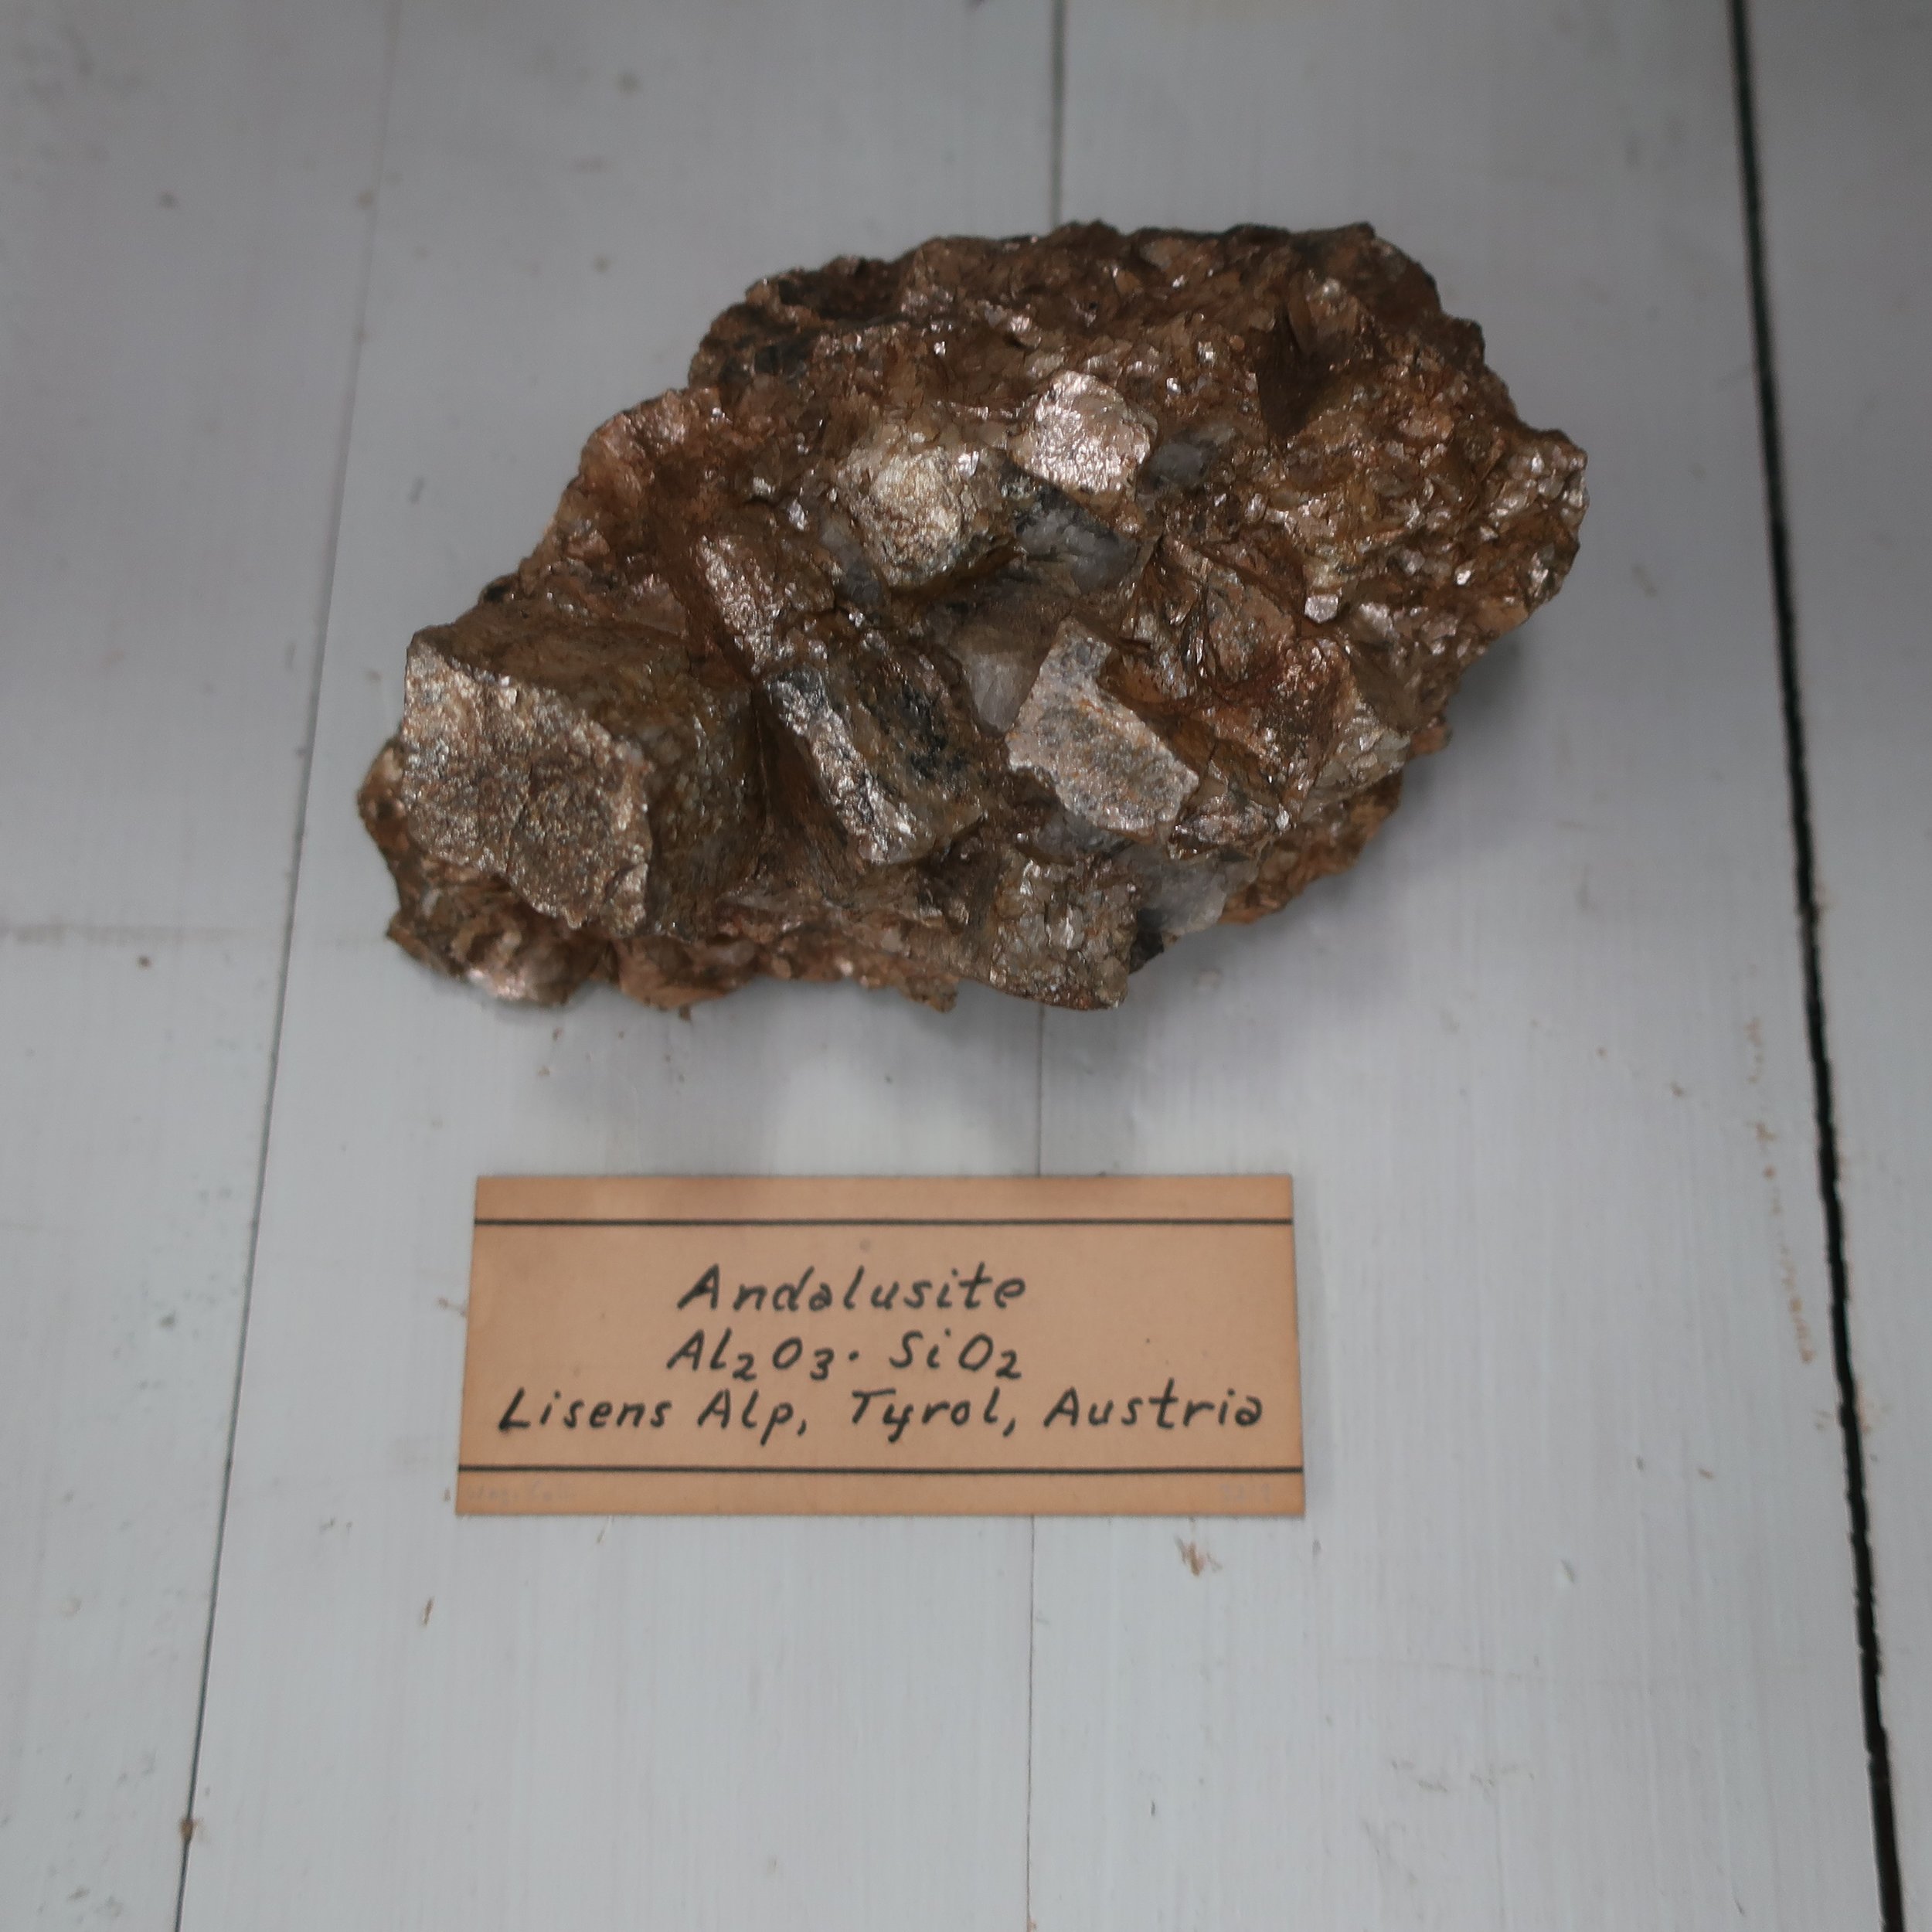   Andalusite  is essentially composed of Silica and Alumina, but contains several other accidental ingredients. Sp. Gr. 3.16. This mineral occurs massive, and in the primary form, a right rhombic prism. It has a lamellar structure with joints paralel